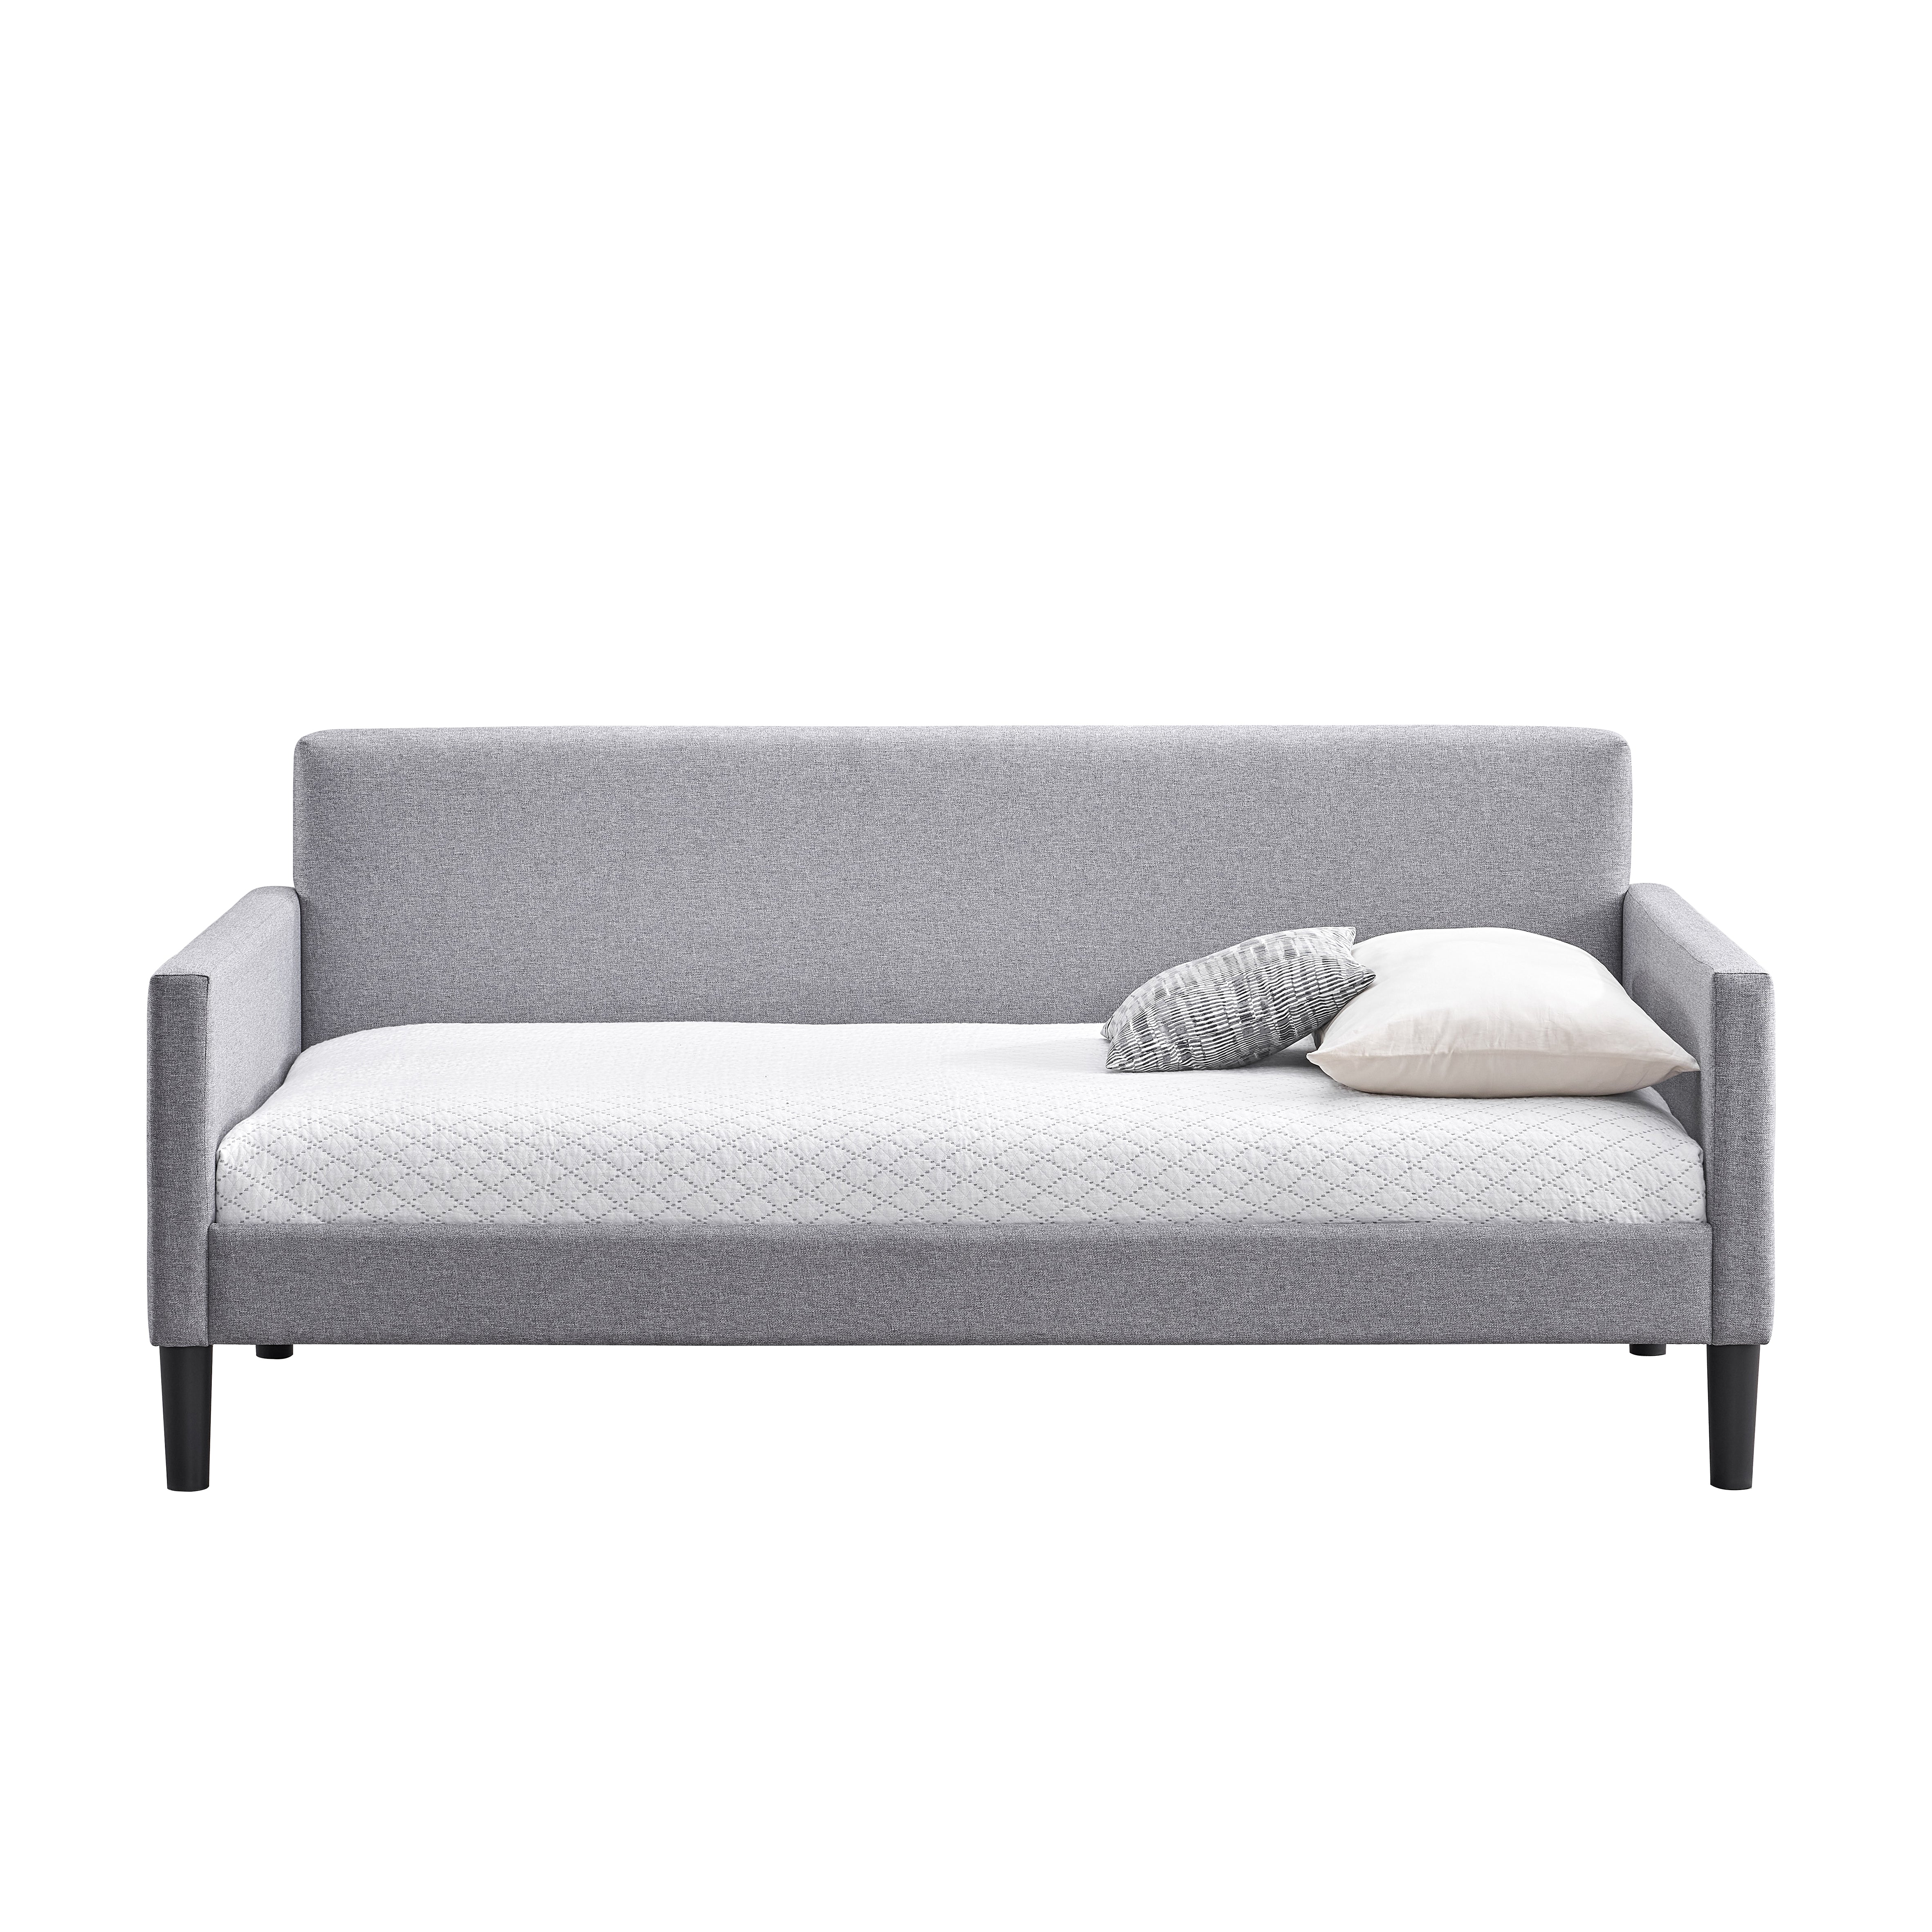 LuXeo Brooklyn Twin Size Upholstered Gray Day Bed